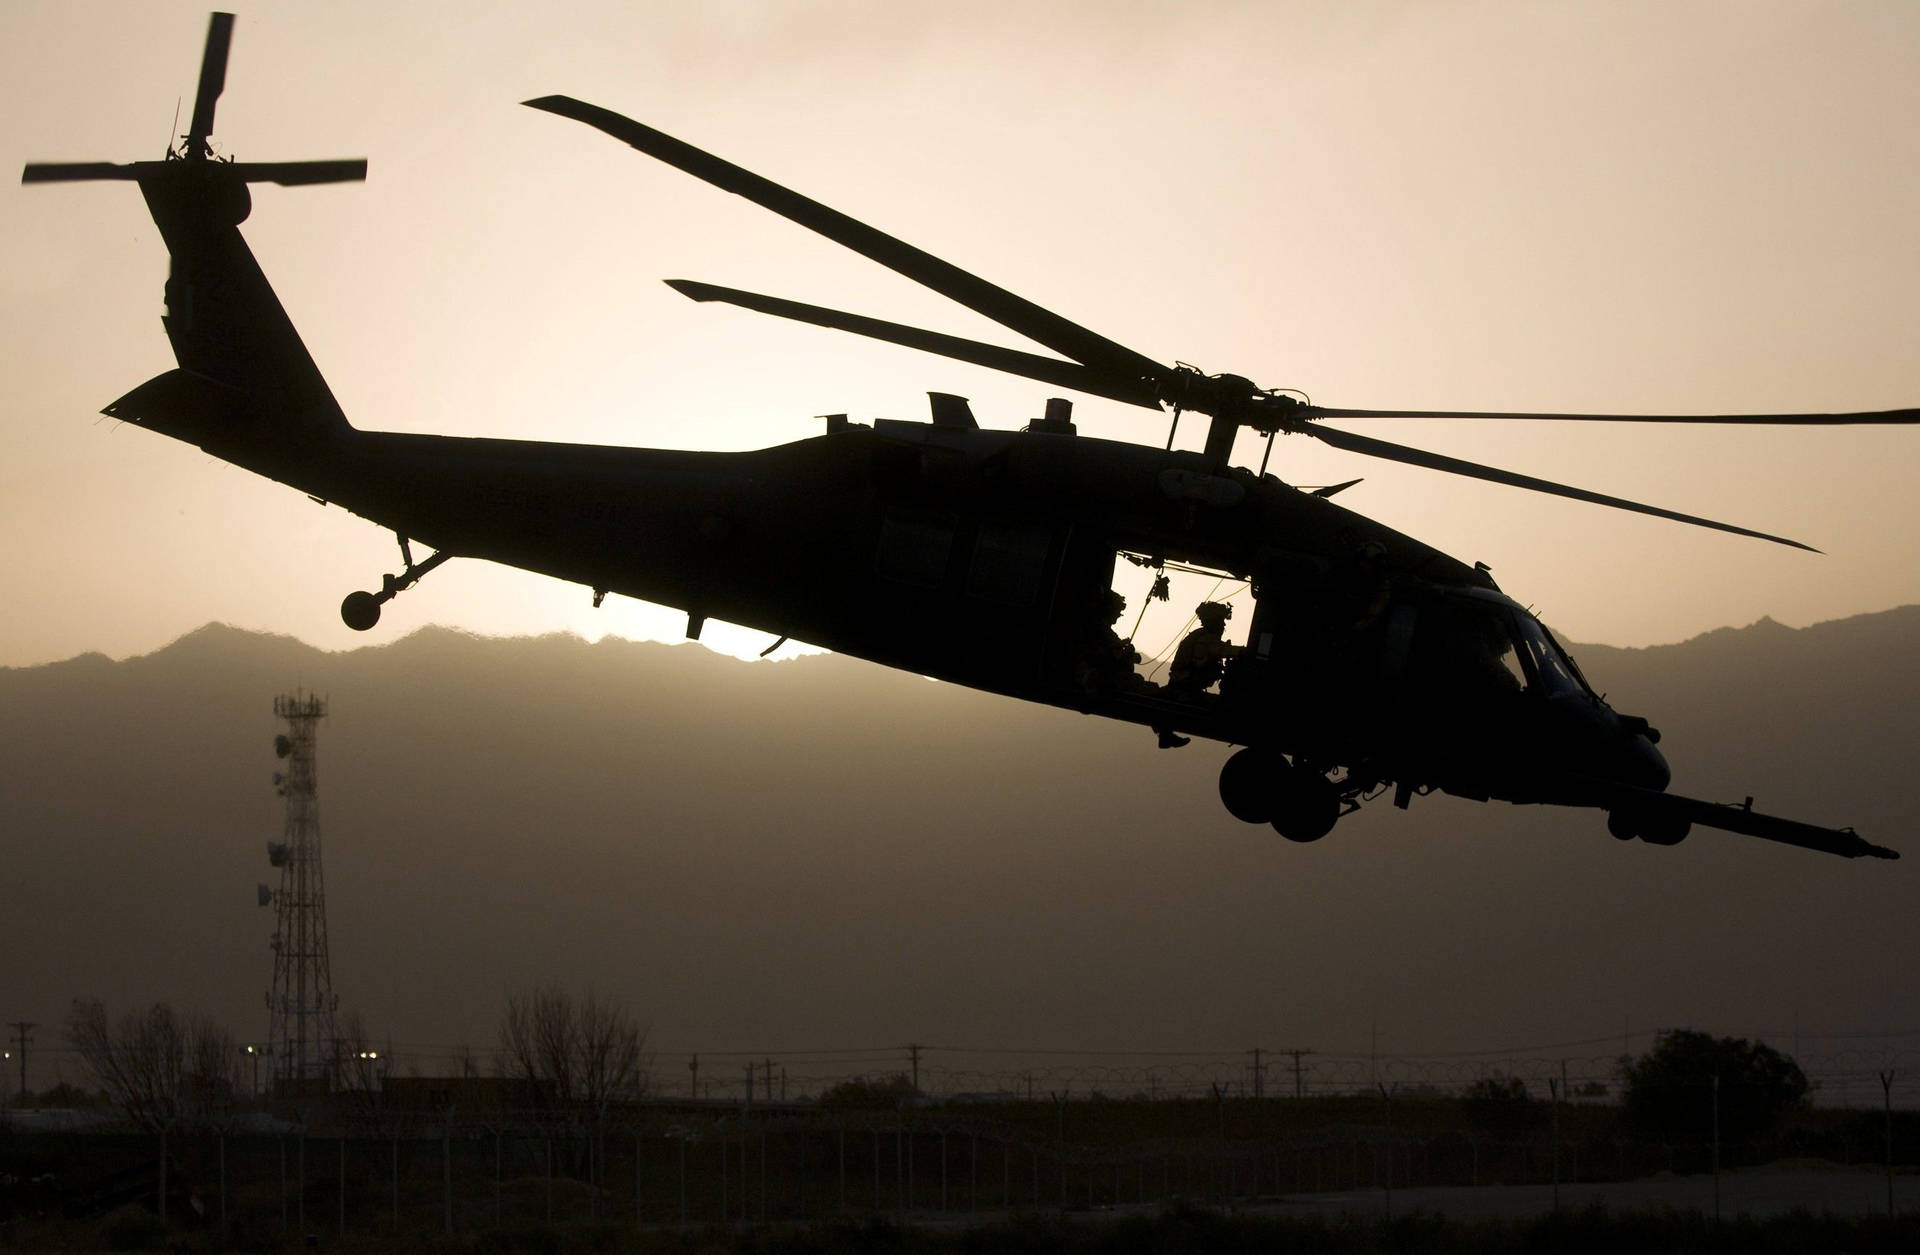 blackhawk helicopter in action wallpaper